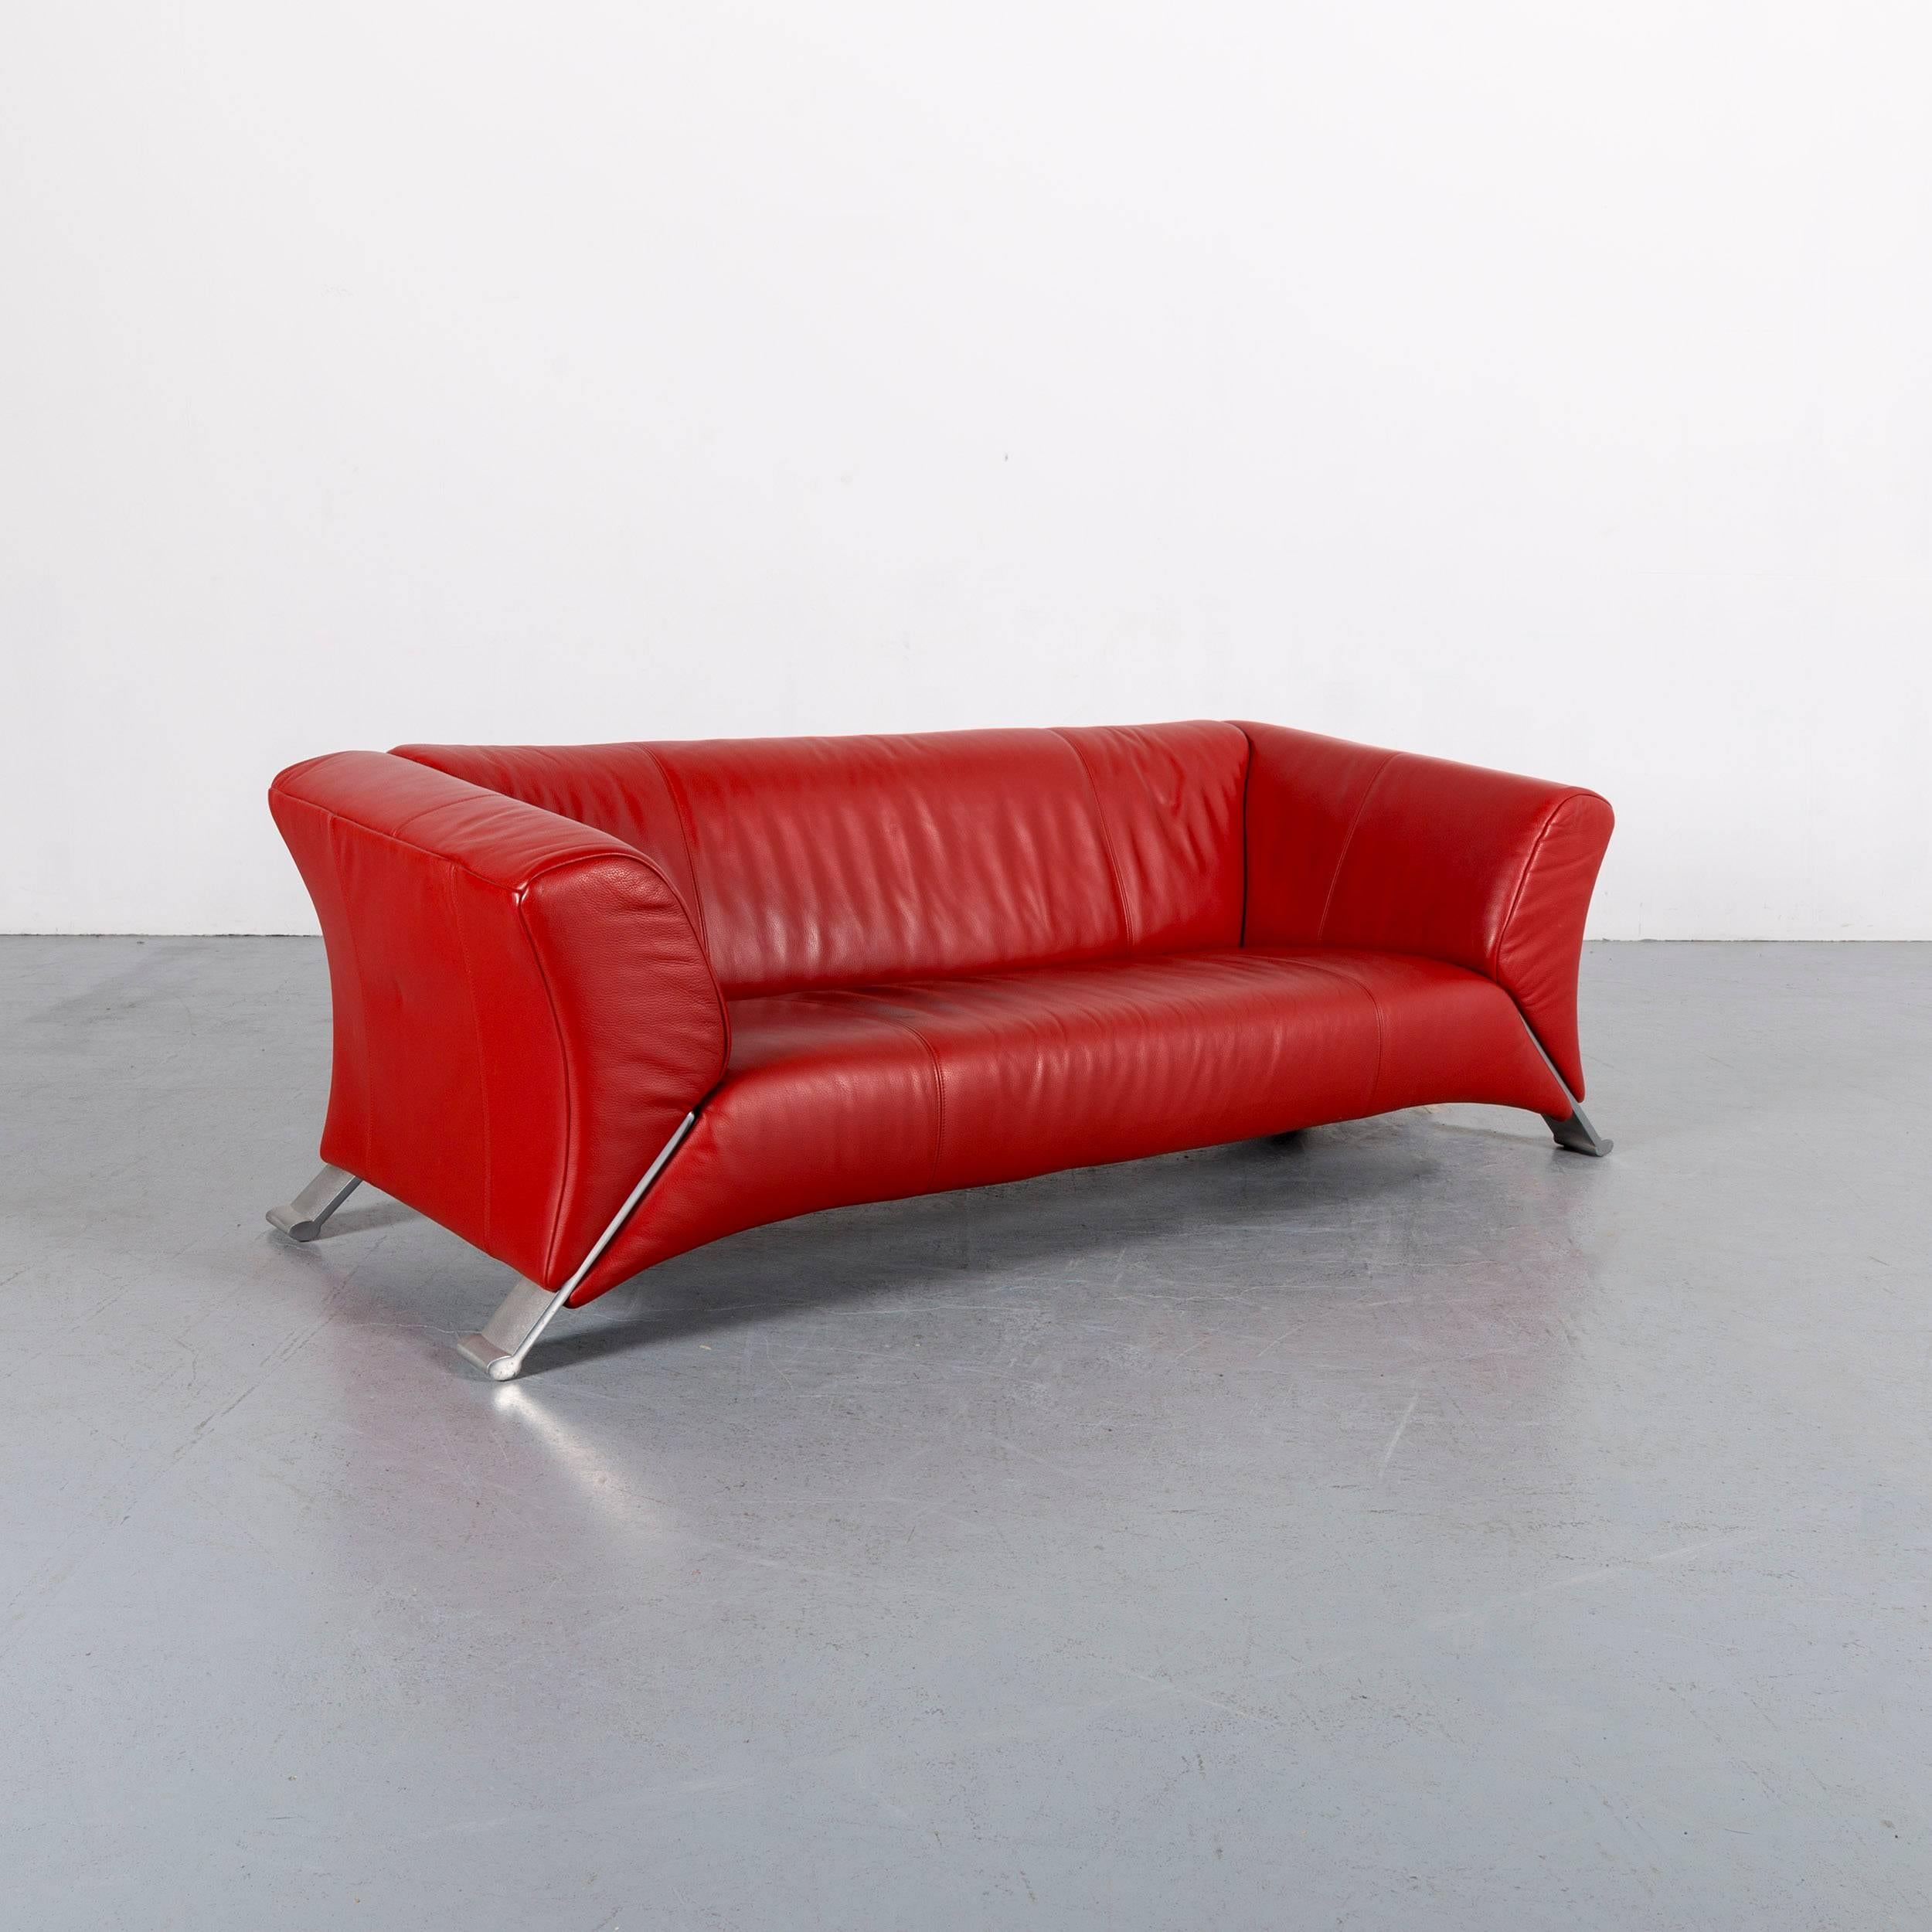 Rolf Benz 322 Designer Sofa Red Three-Seat Leather Modern Couch Metal Feet 1